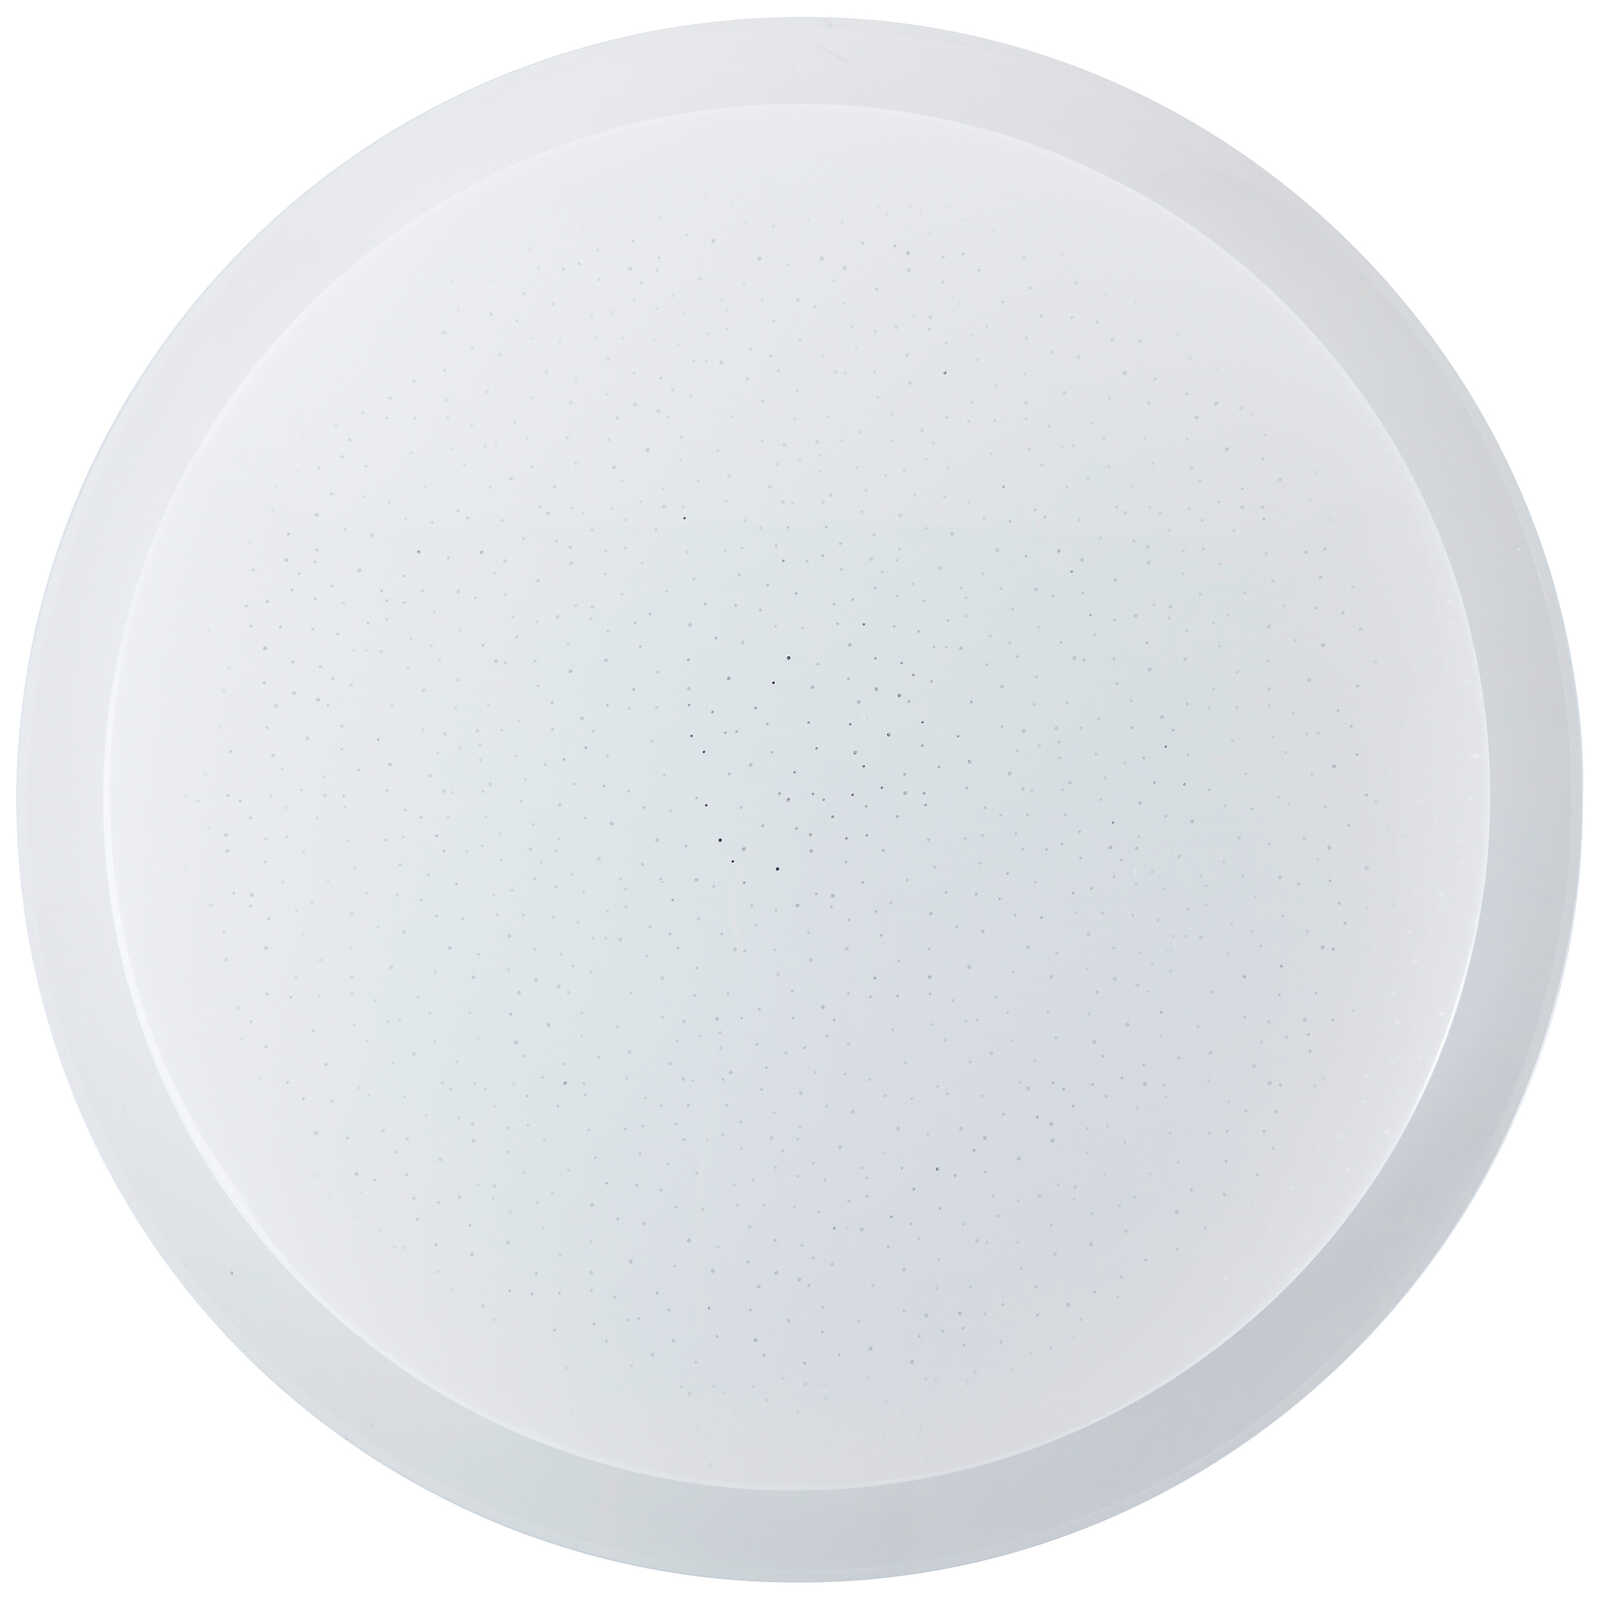             Plastic wall and ceiling light - Theo 1 - White
        